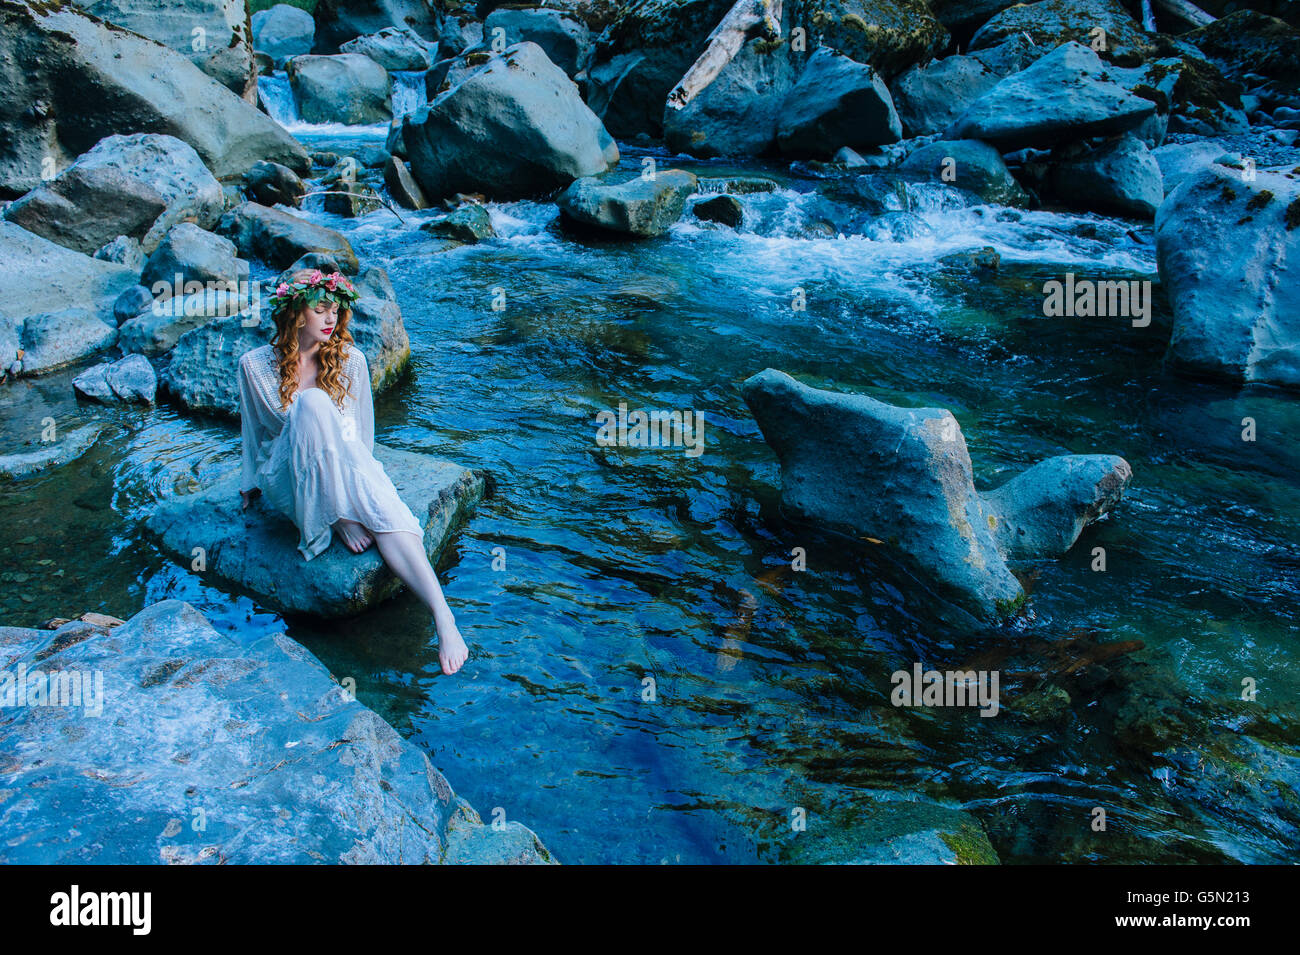 Caucasian woman wearing flower crown on rock at river Banque D'Images